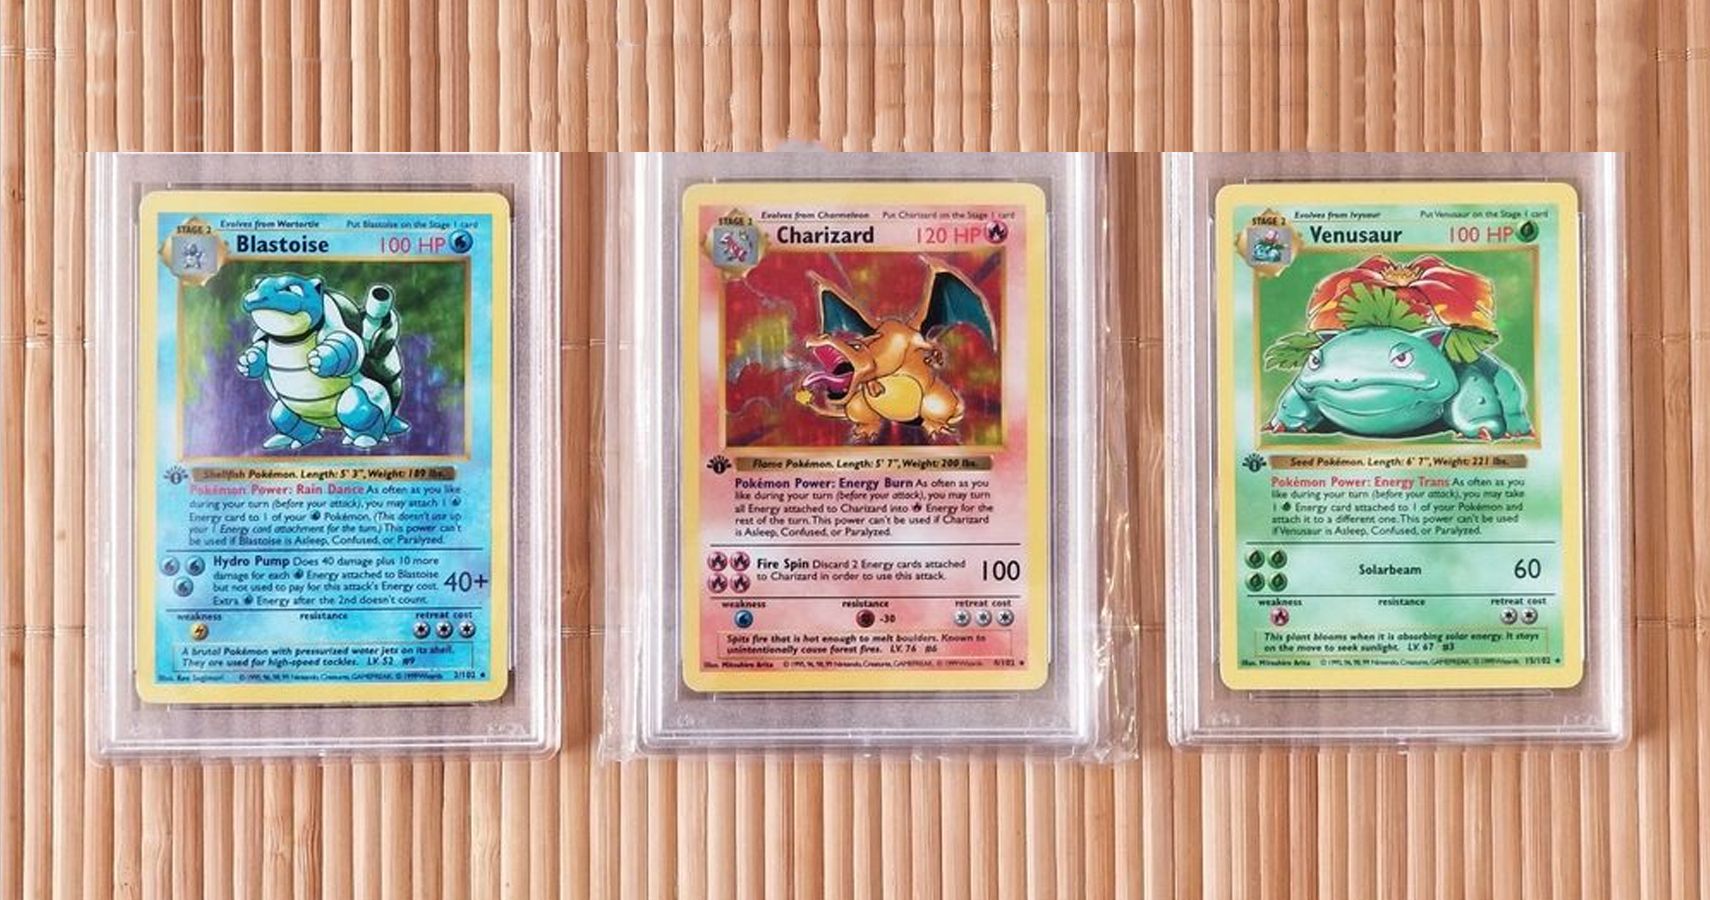 COMPLETE SET OF RARE CARDS - Anyone know if these are worth